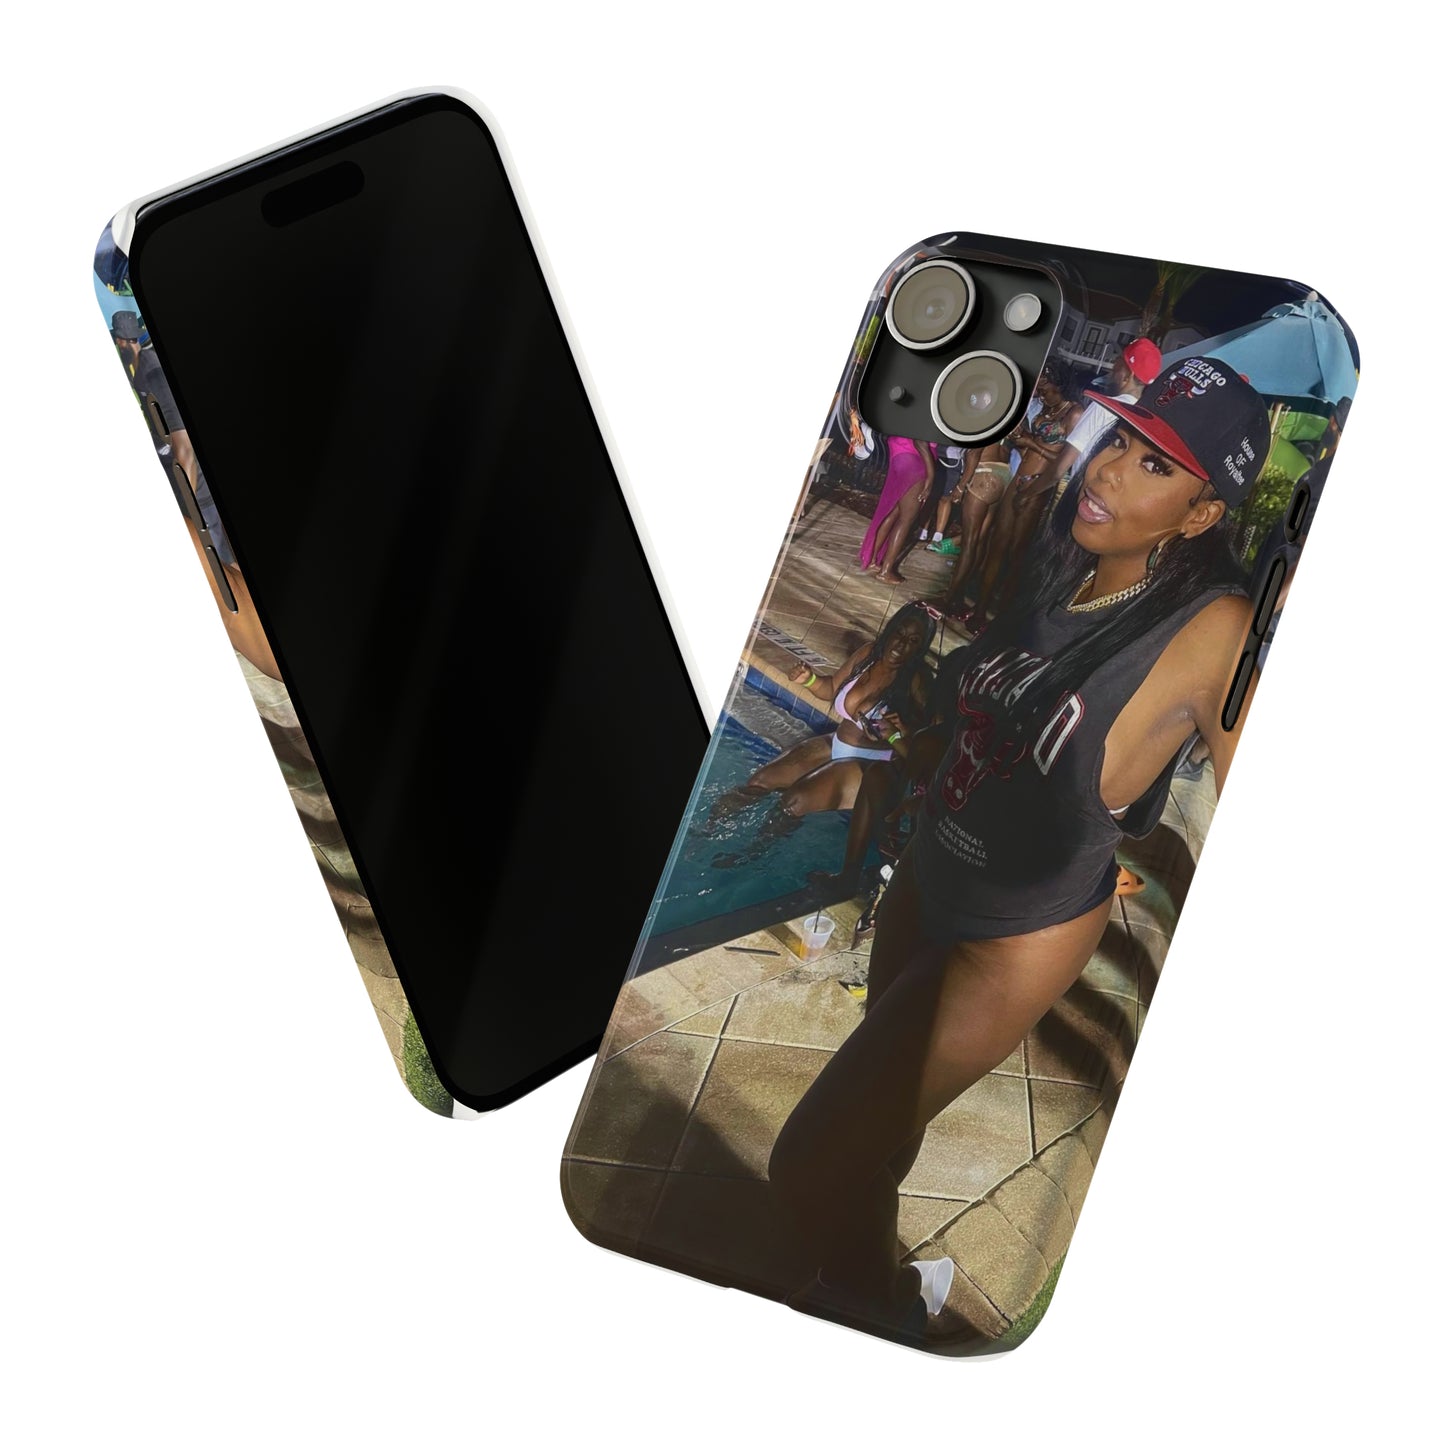 Single Picture Phone Cases